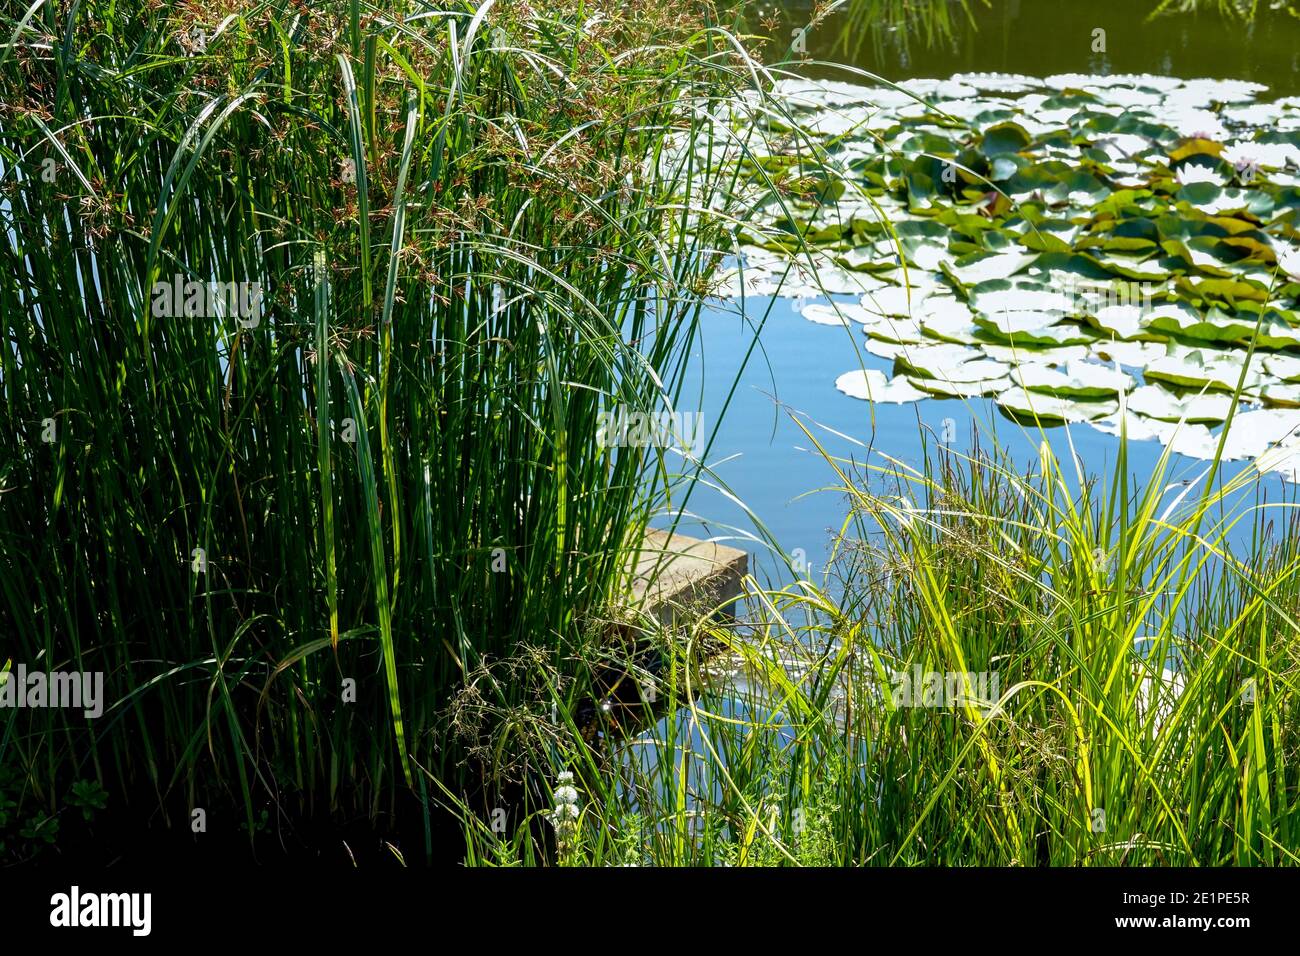 Plants growing in a small garden pond Pretty natural garden pond Stock Photo